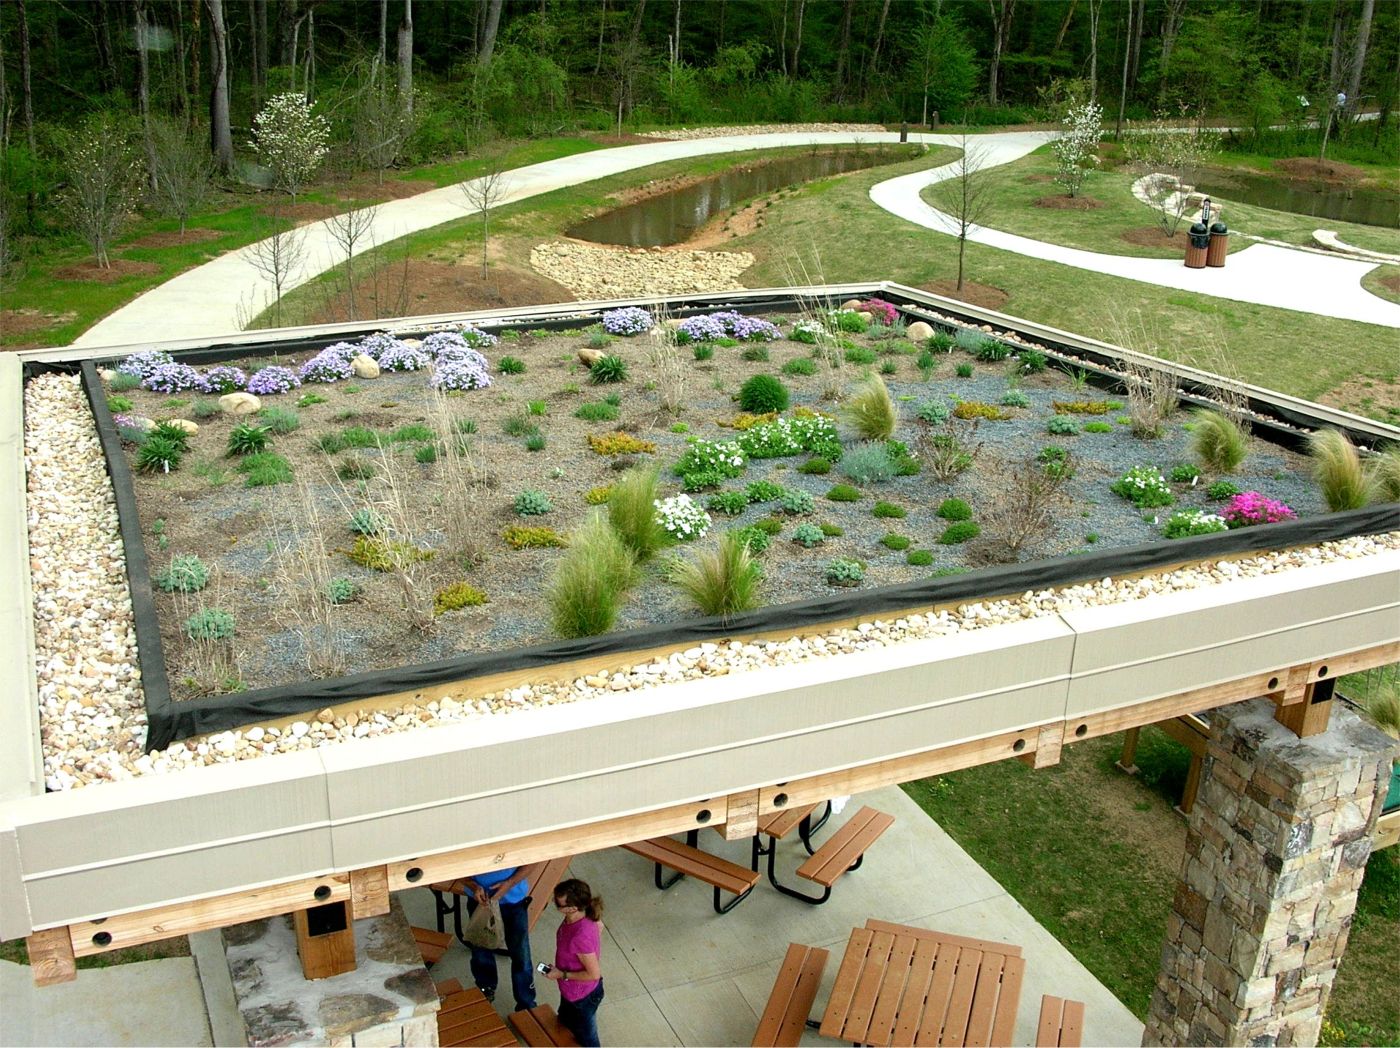 The Greenroof Pavilion & Greenroof Trial Gardens of Rock Mill Park Featured Image